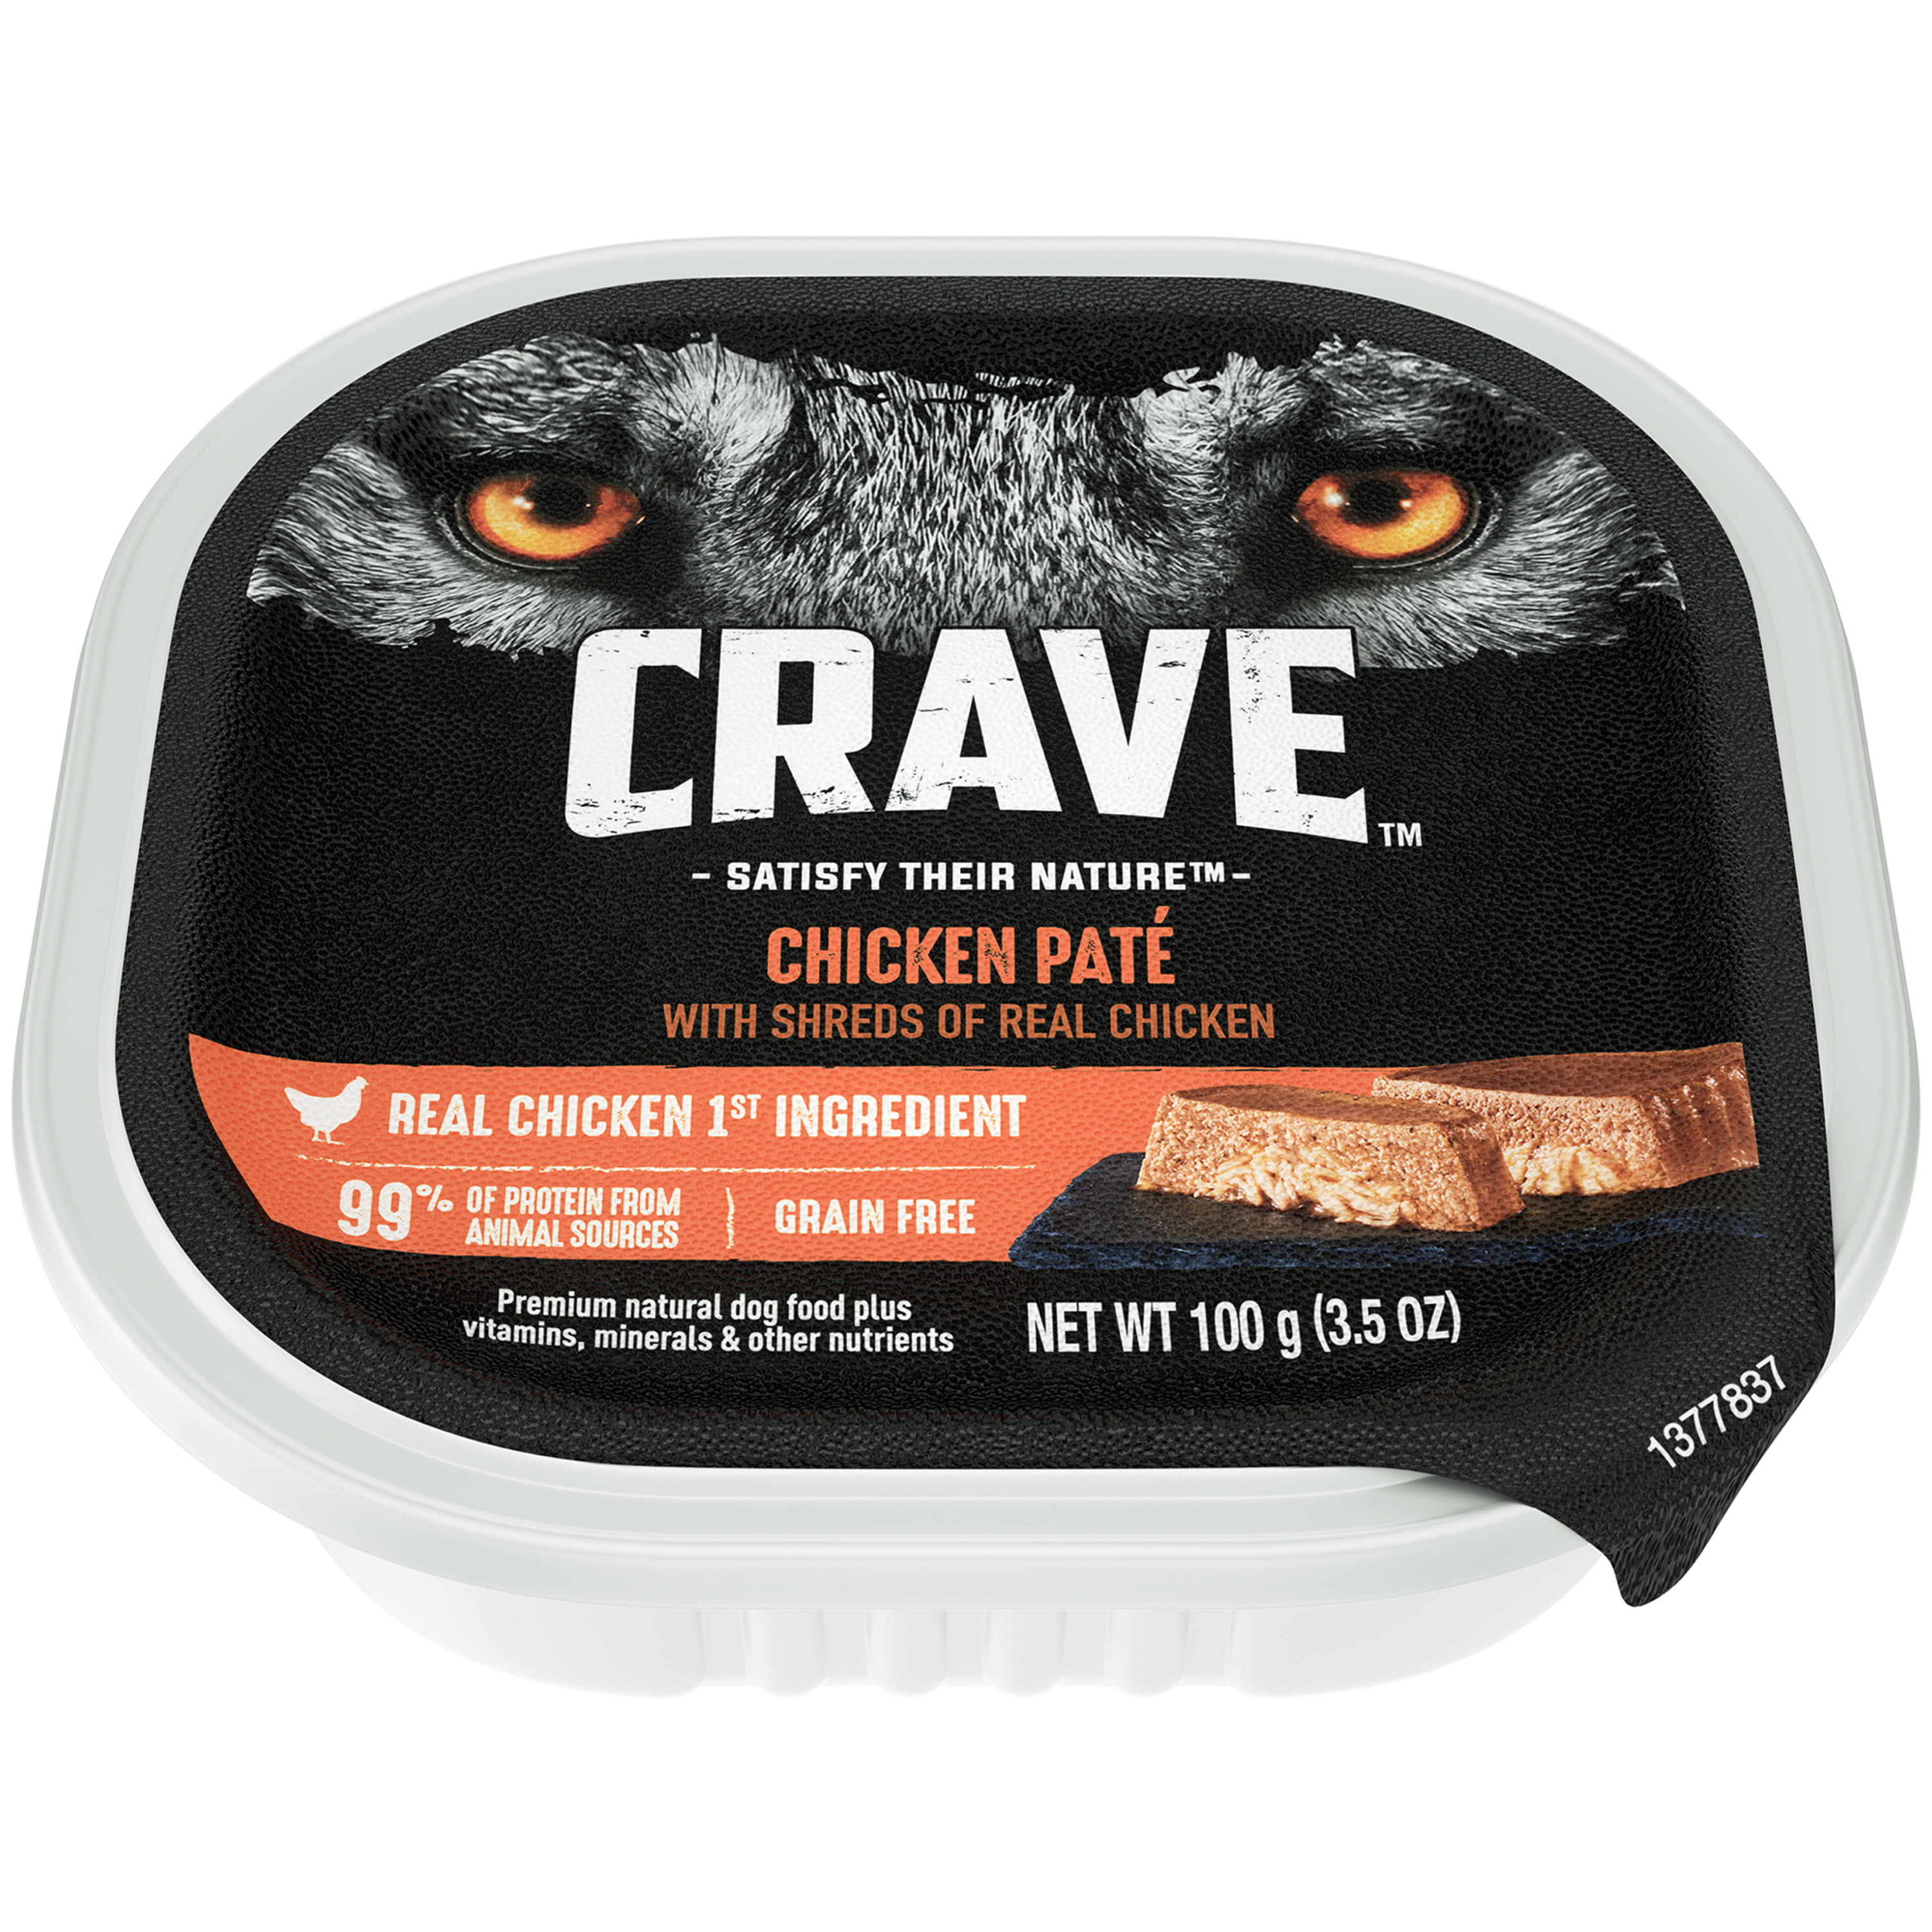 Crave Grain Free Adult Wet Dog Food Chicken Pate With Shreds Of Real Chicken 3 5 Oz Tray Walmart Com Walmart Com